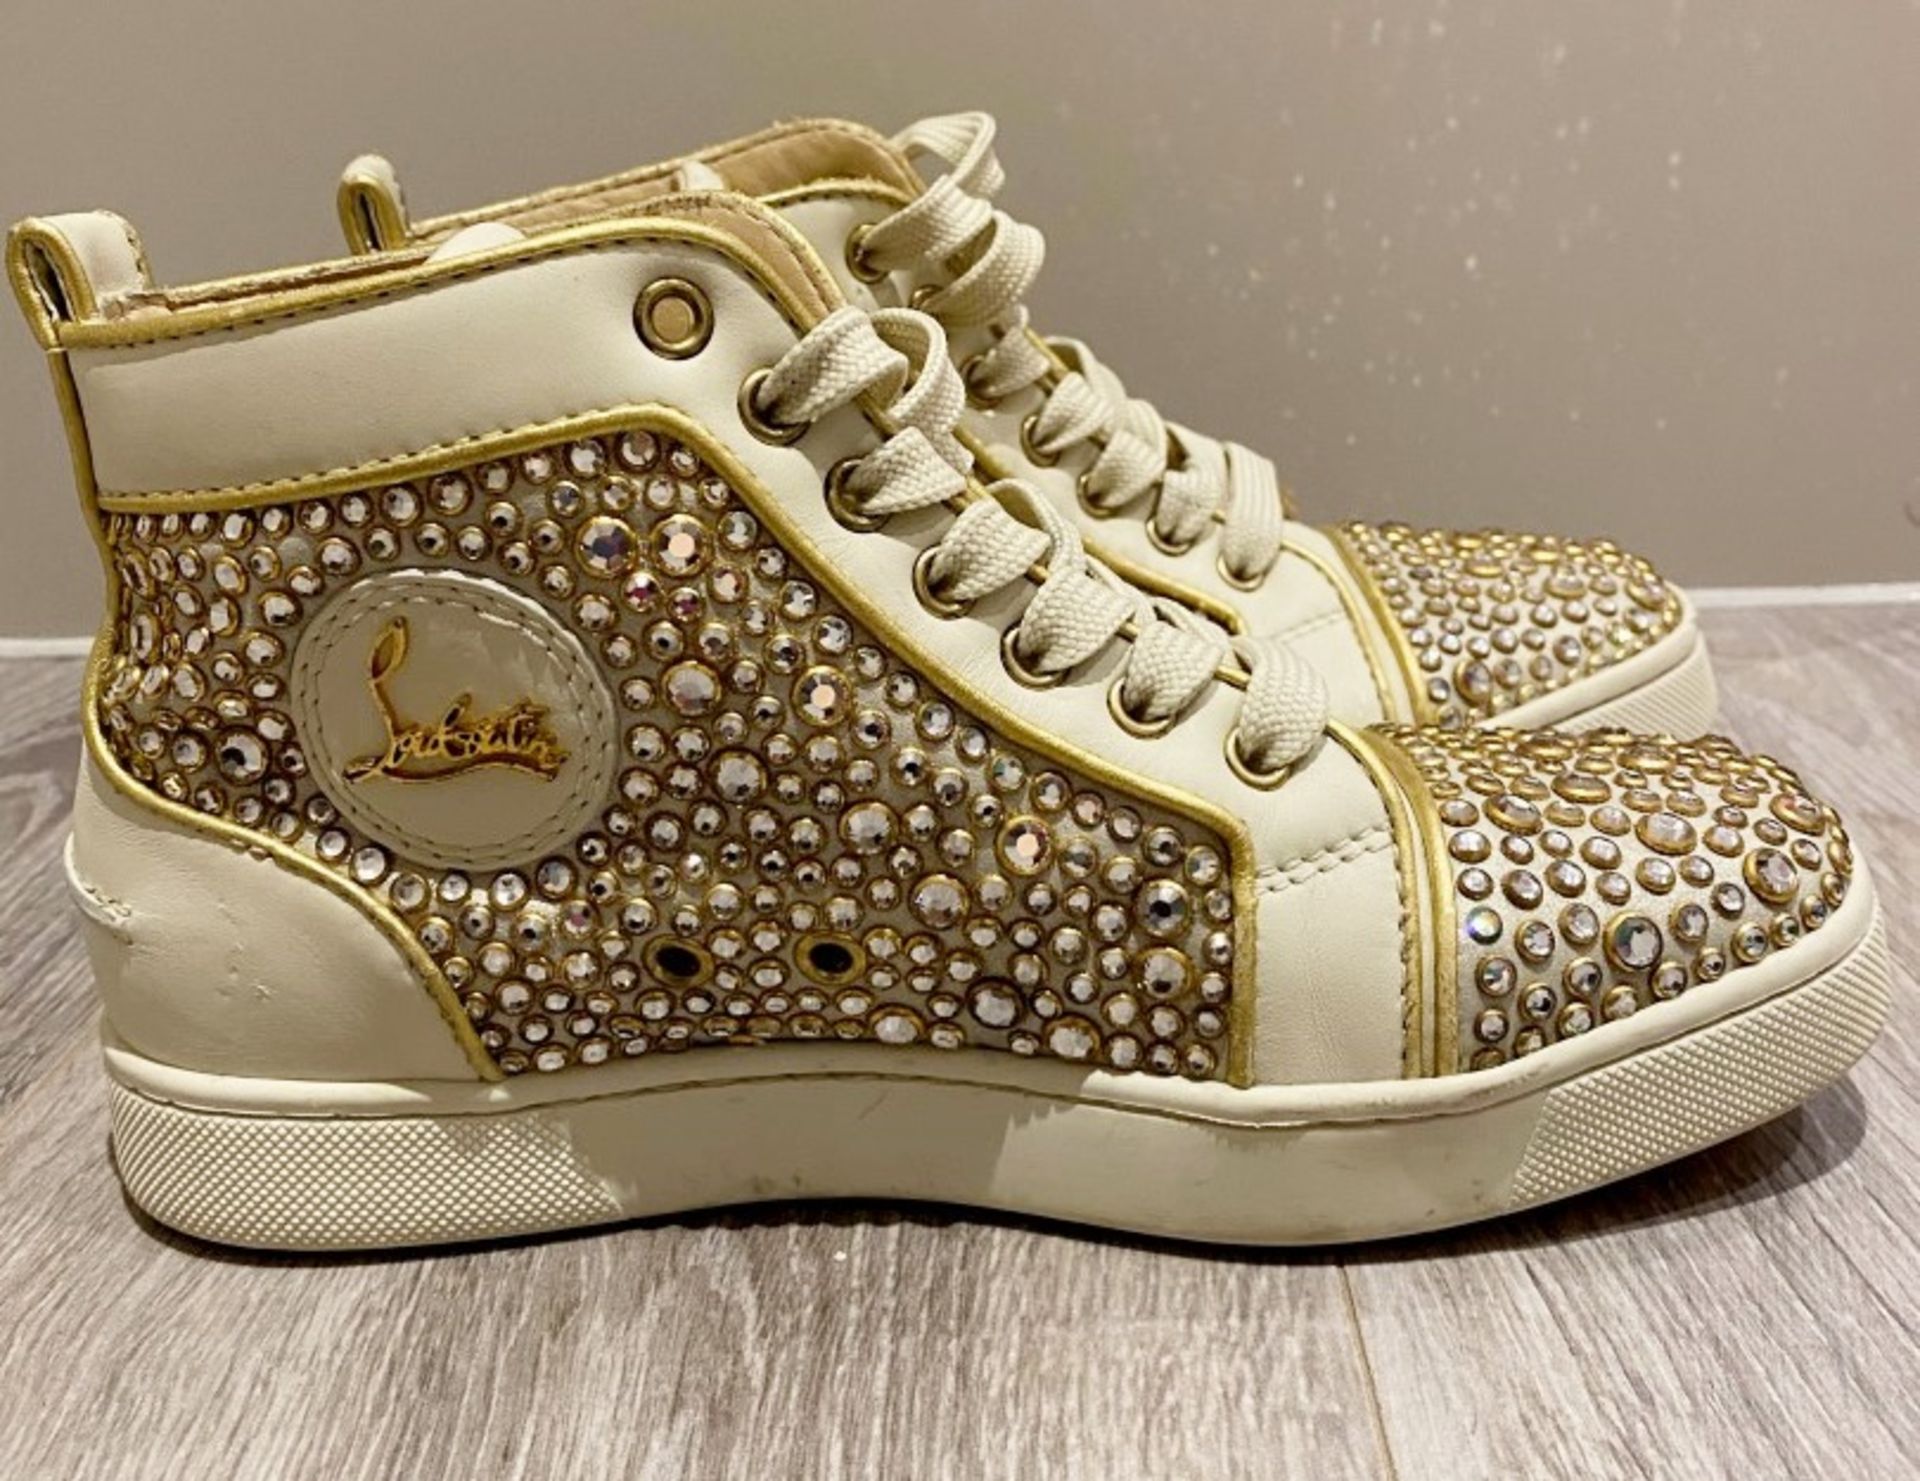 1 x Pair Of Genuine Christain Louboutin Sneakers In Crème And Silver - Size: 35 - Preowned in Worn C